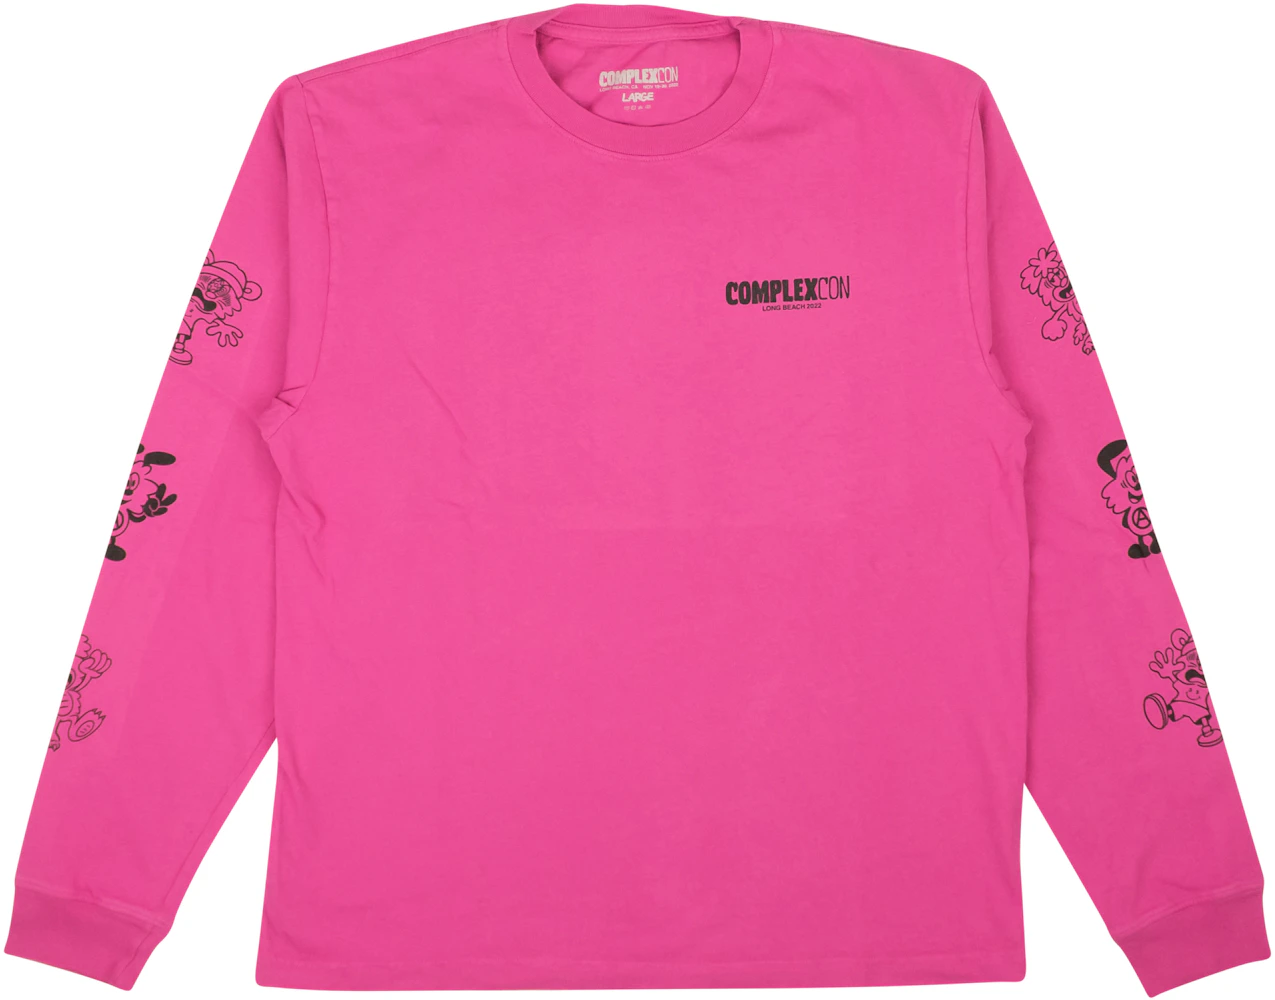 Complexcon x Verdy Pink Long Sleeve T-Shirt Pink Men's - FW22 - GB